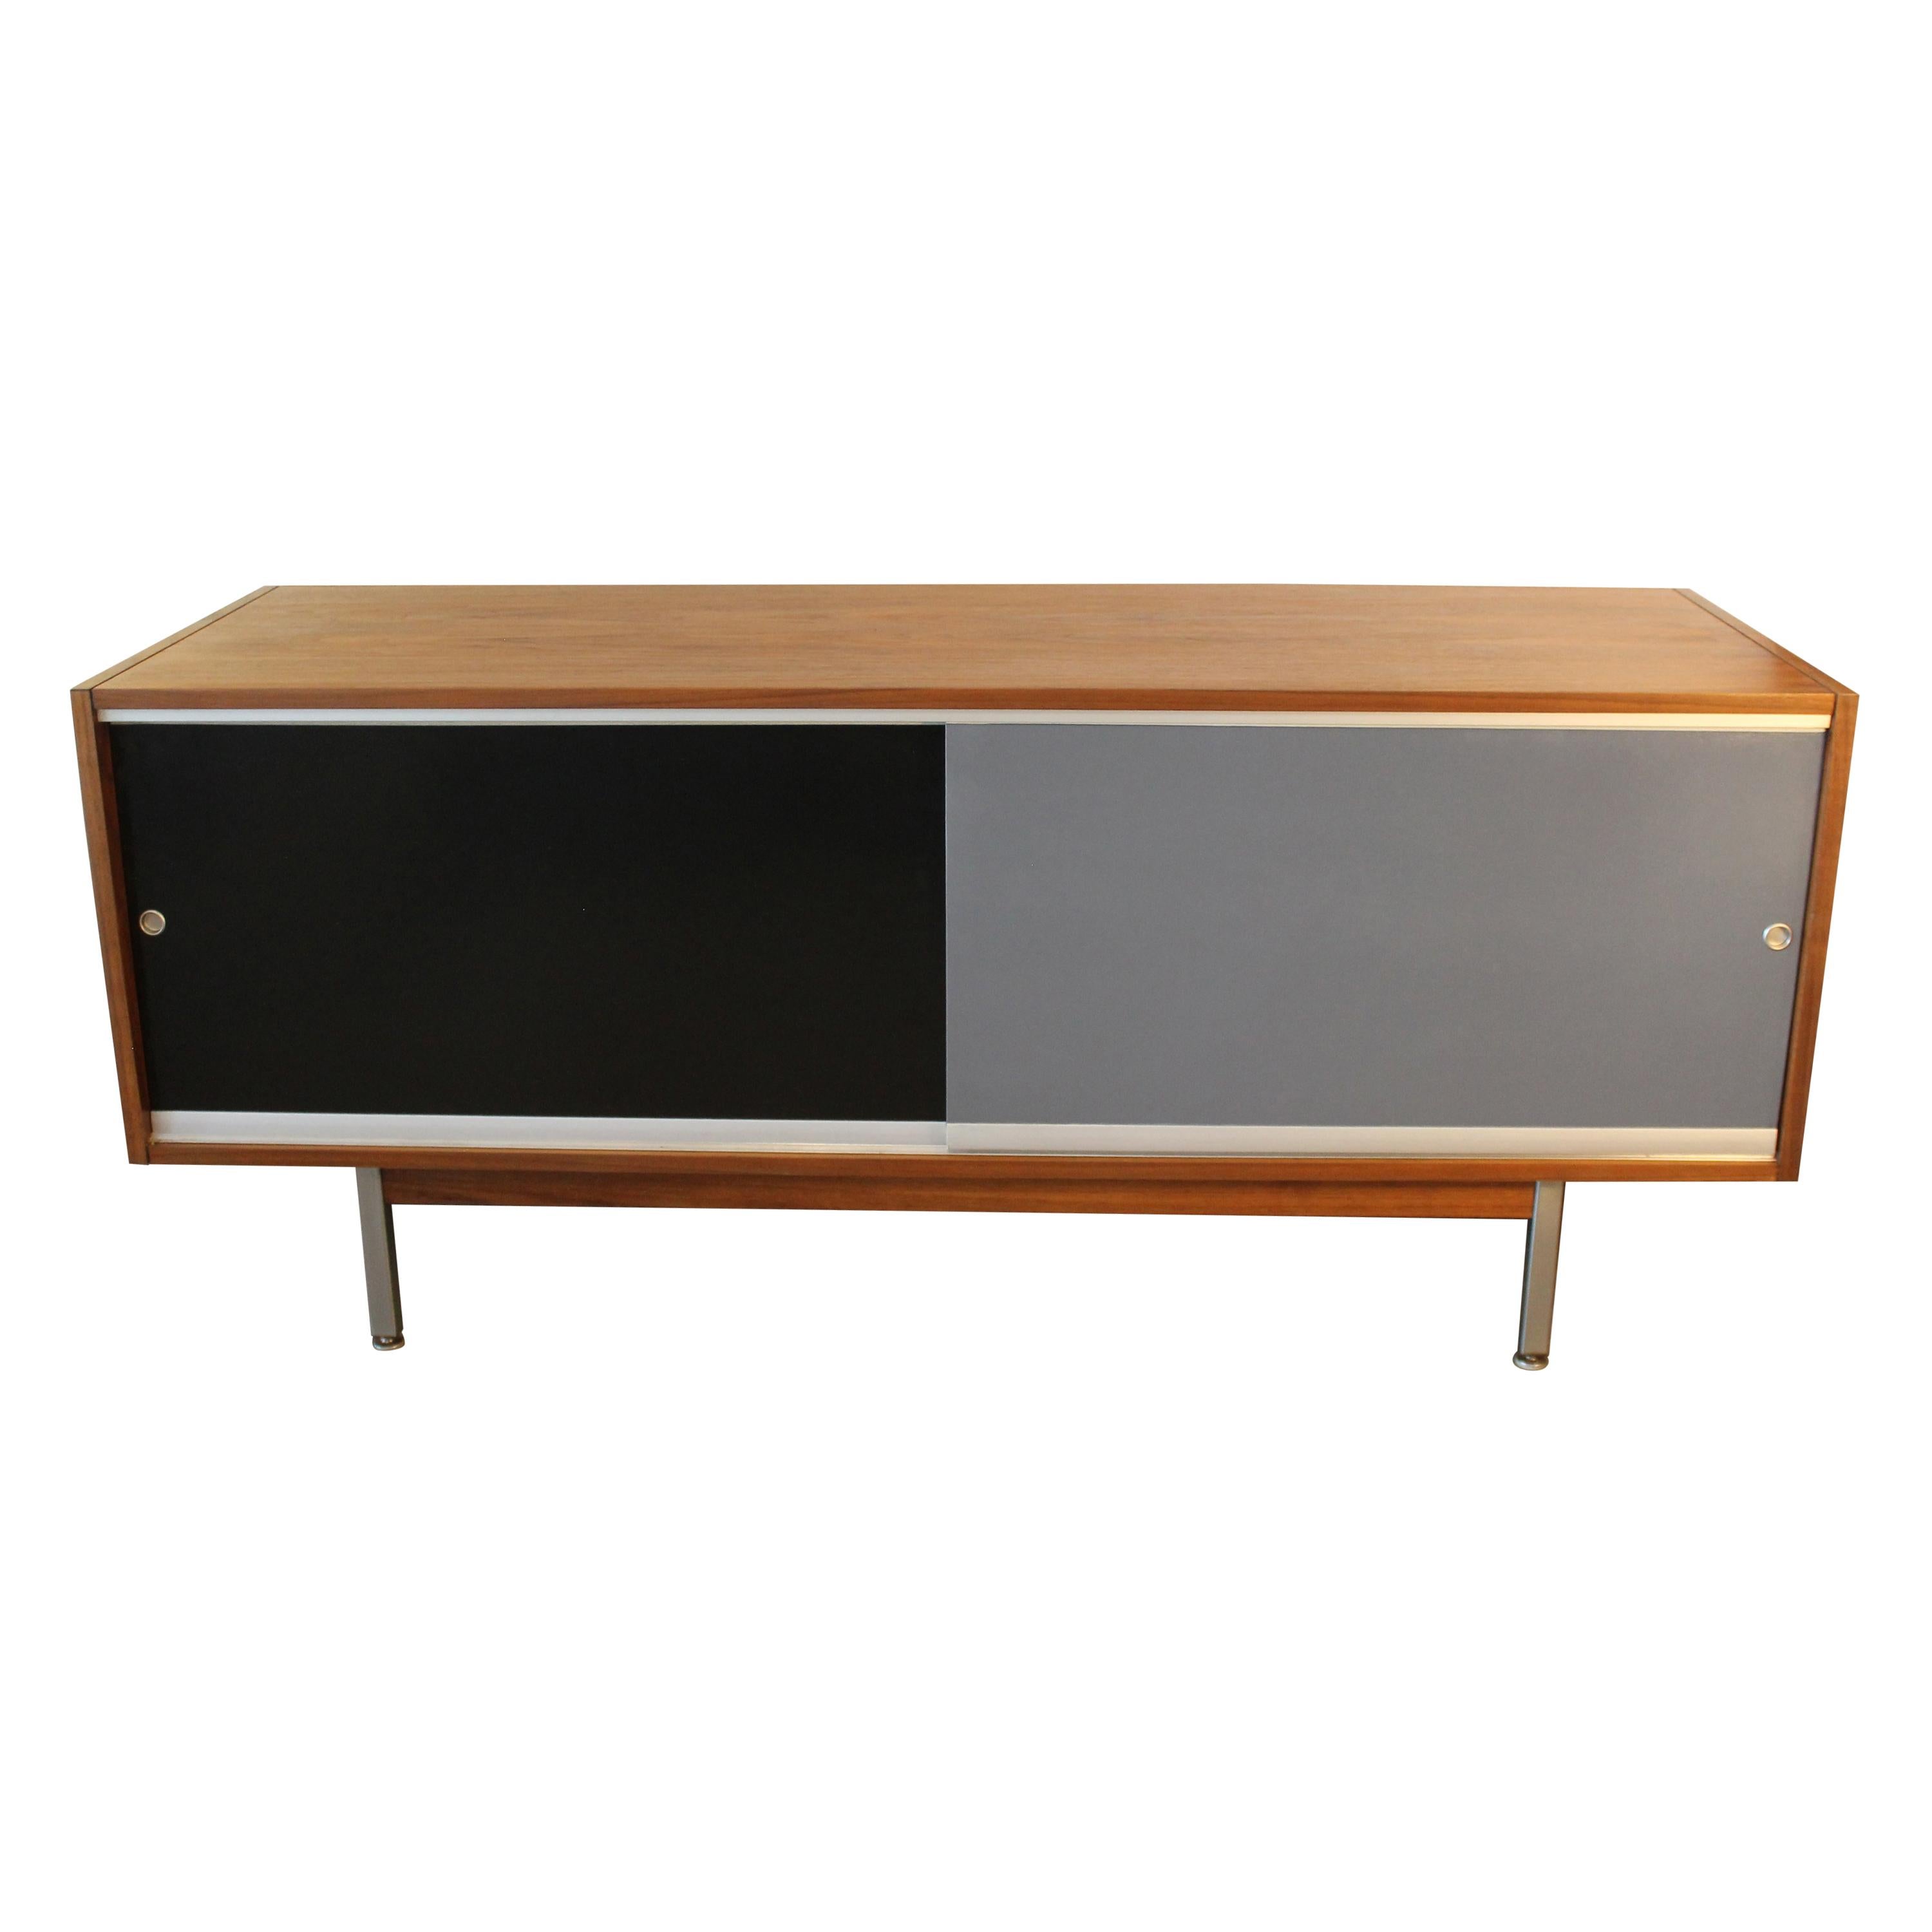 Credenza in the Style of George Nelson With Black and Grey Sliders